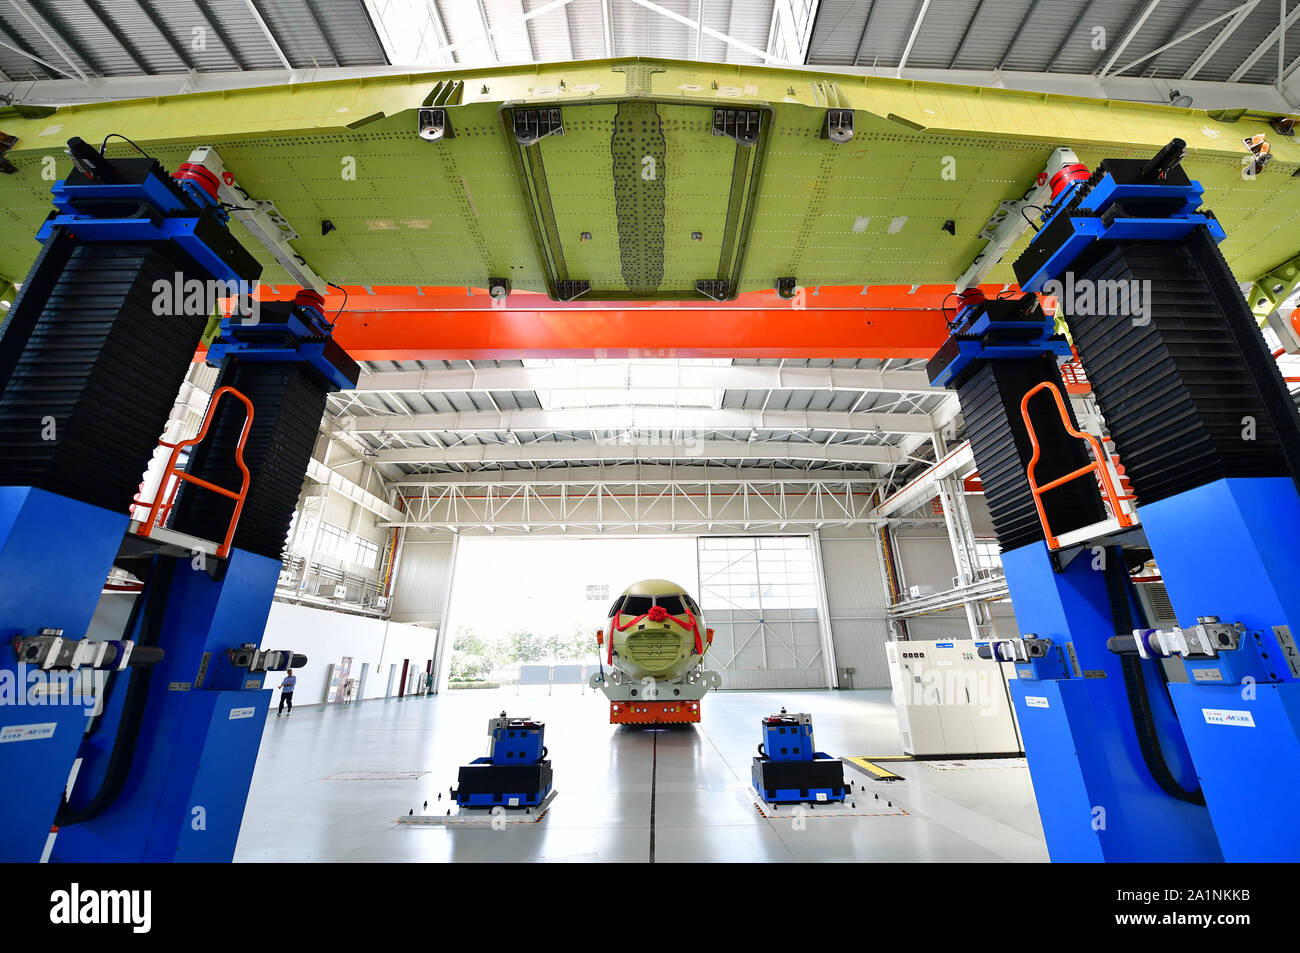 Beijing, China's Shaanxi Province. 27th Sep, 2019. Engineers make preparations to join the wings with the fuselage of a Xinzhou-700 short-haul aircraft, manufactured by the Xi'an Aircraft Industry Company (XAC) of the Aviation Industry Corporation of China, in Xi'an, northwest China's Shaanxi Province, Sept. 27, 2019. Credit: Shao Rui/Xinhua/Alamy Live News Stock Photo